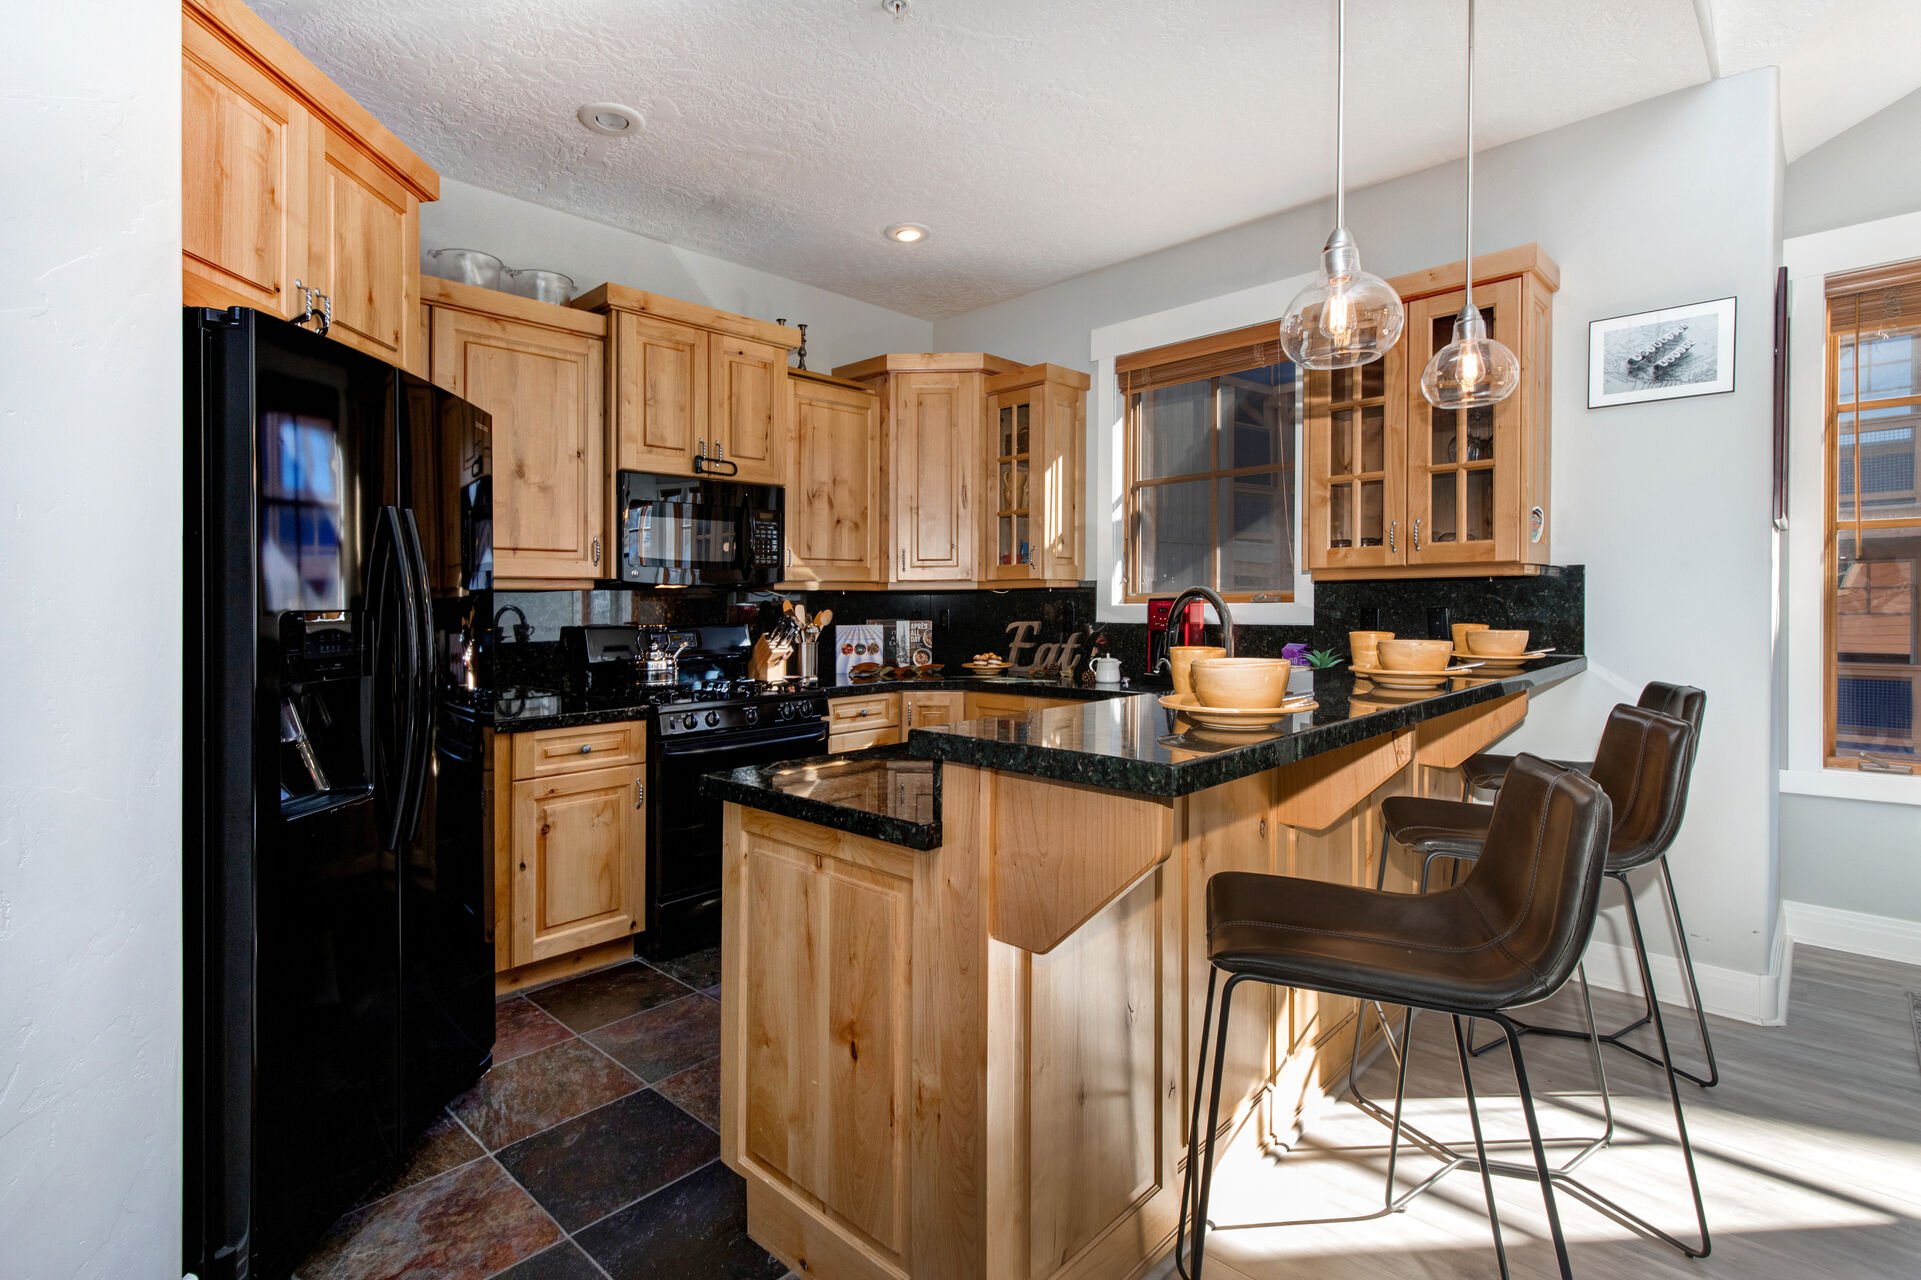 Fully Equipped Kitchen with stone countertops, ice-maker, and bar seating for 3